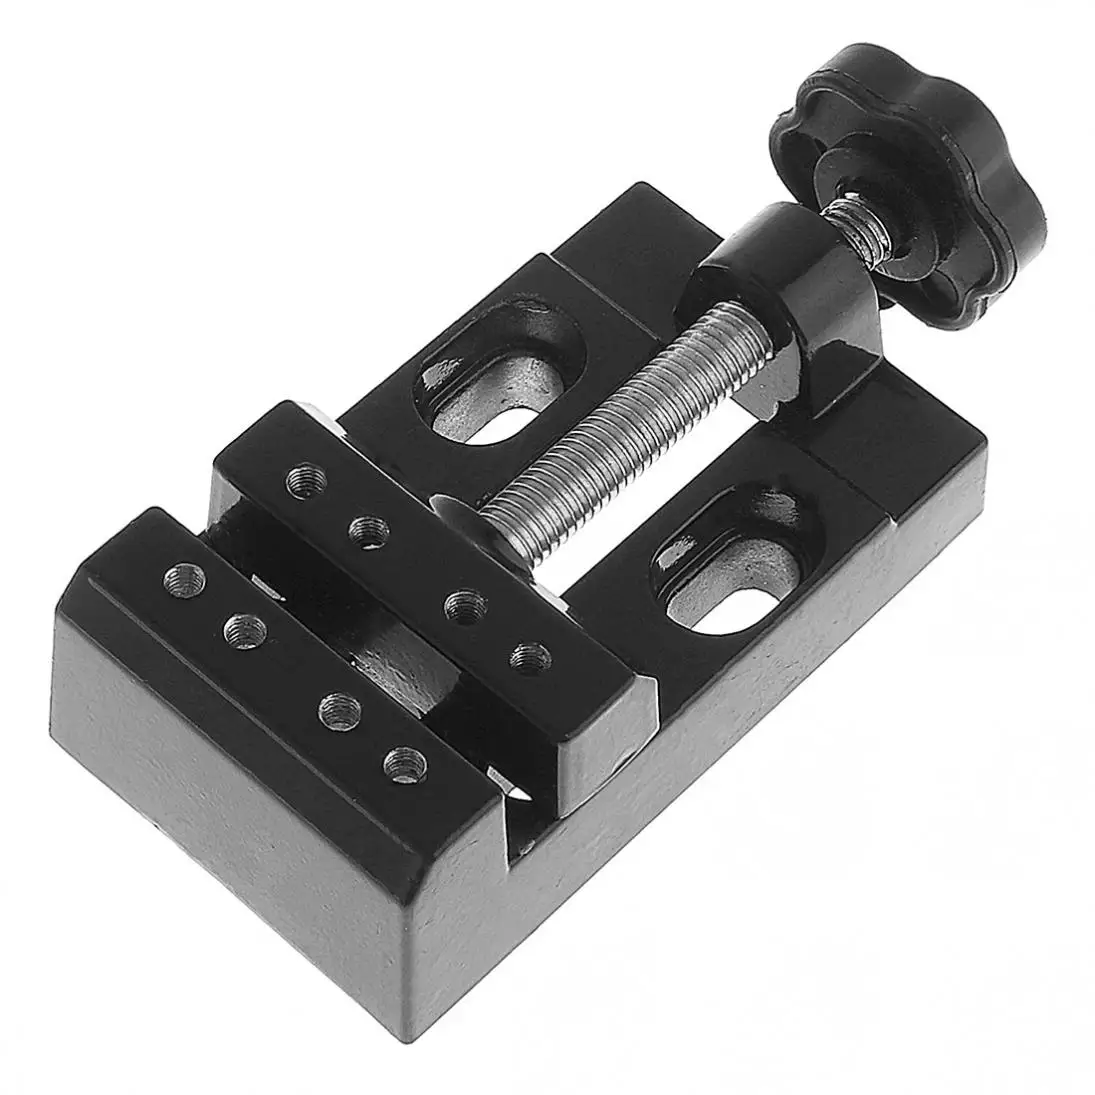 New DIY Sculpture Craft Jaw Bench Clamp Press Vice Opening Parallel Table Vise for Jaw Bench Clamp Drill new diy sculpture craft jaw bench clamp press vice opening parallel table vise for jaw bench clamp drill